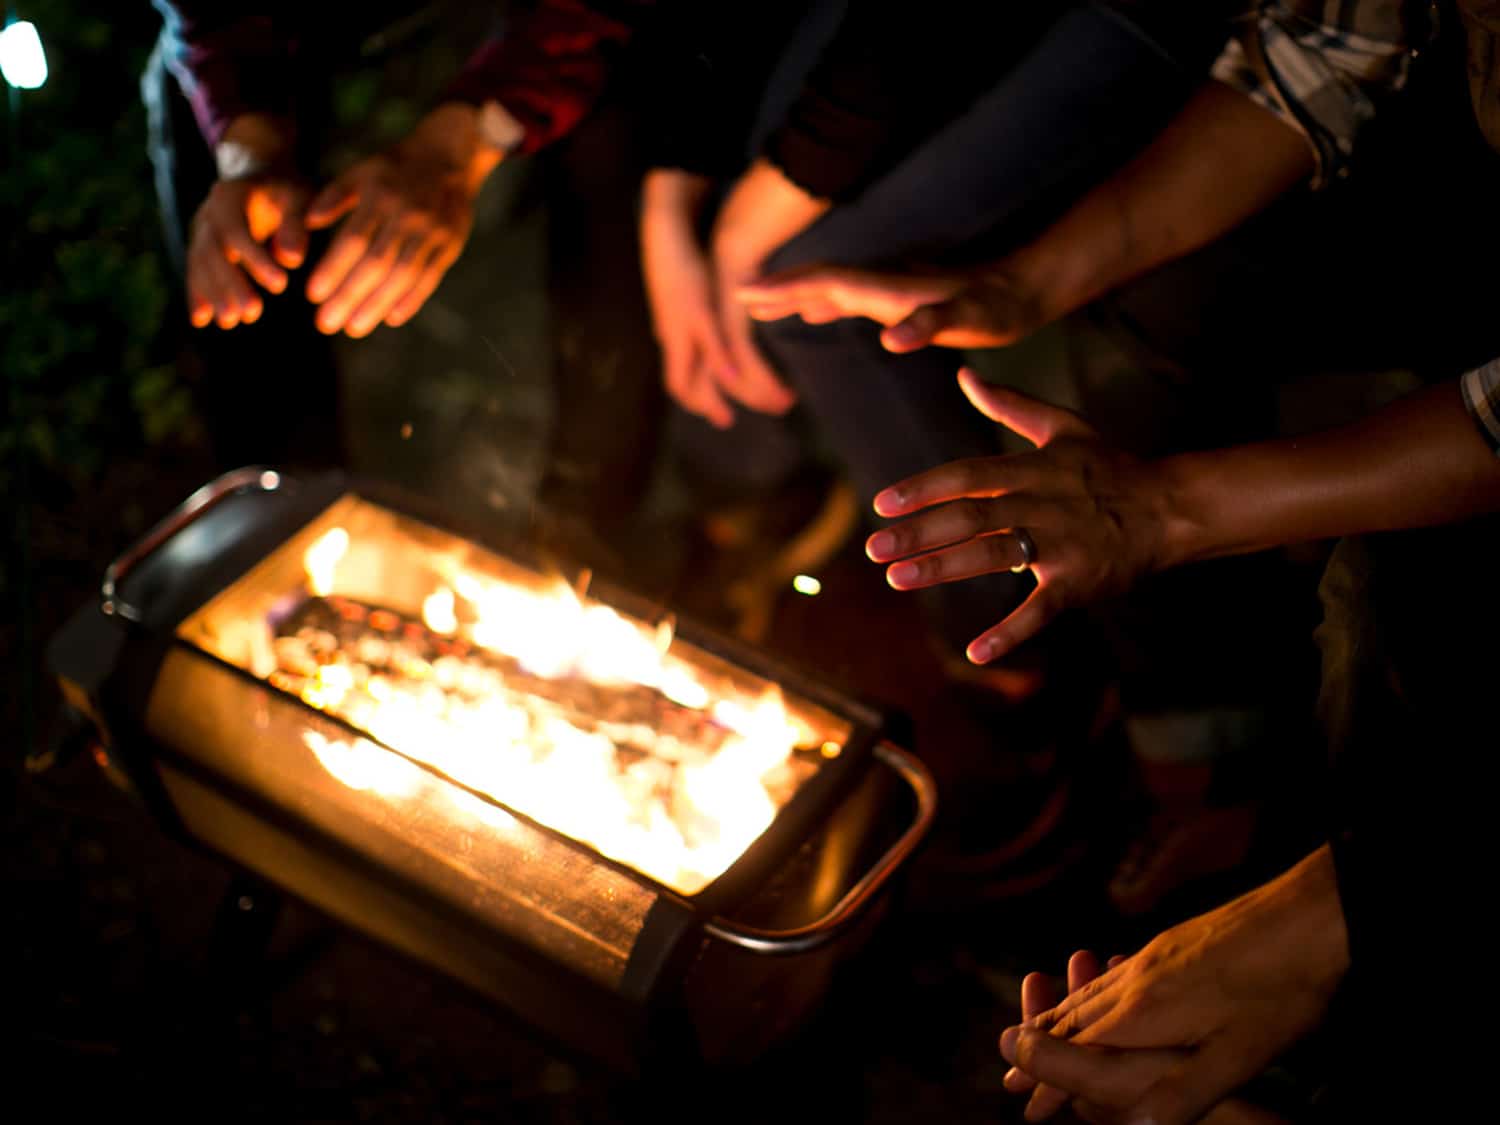 Campers gathered around the BioLite FirePit+ in the woods.